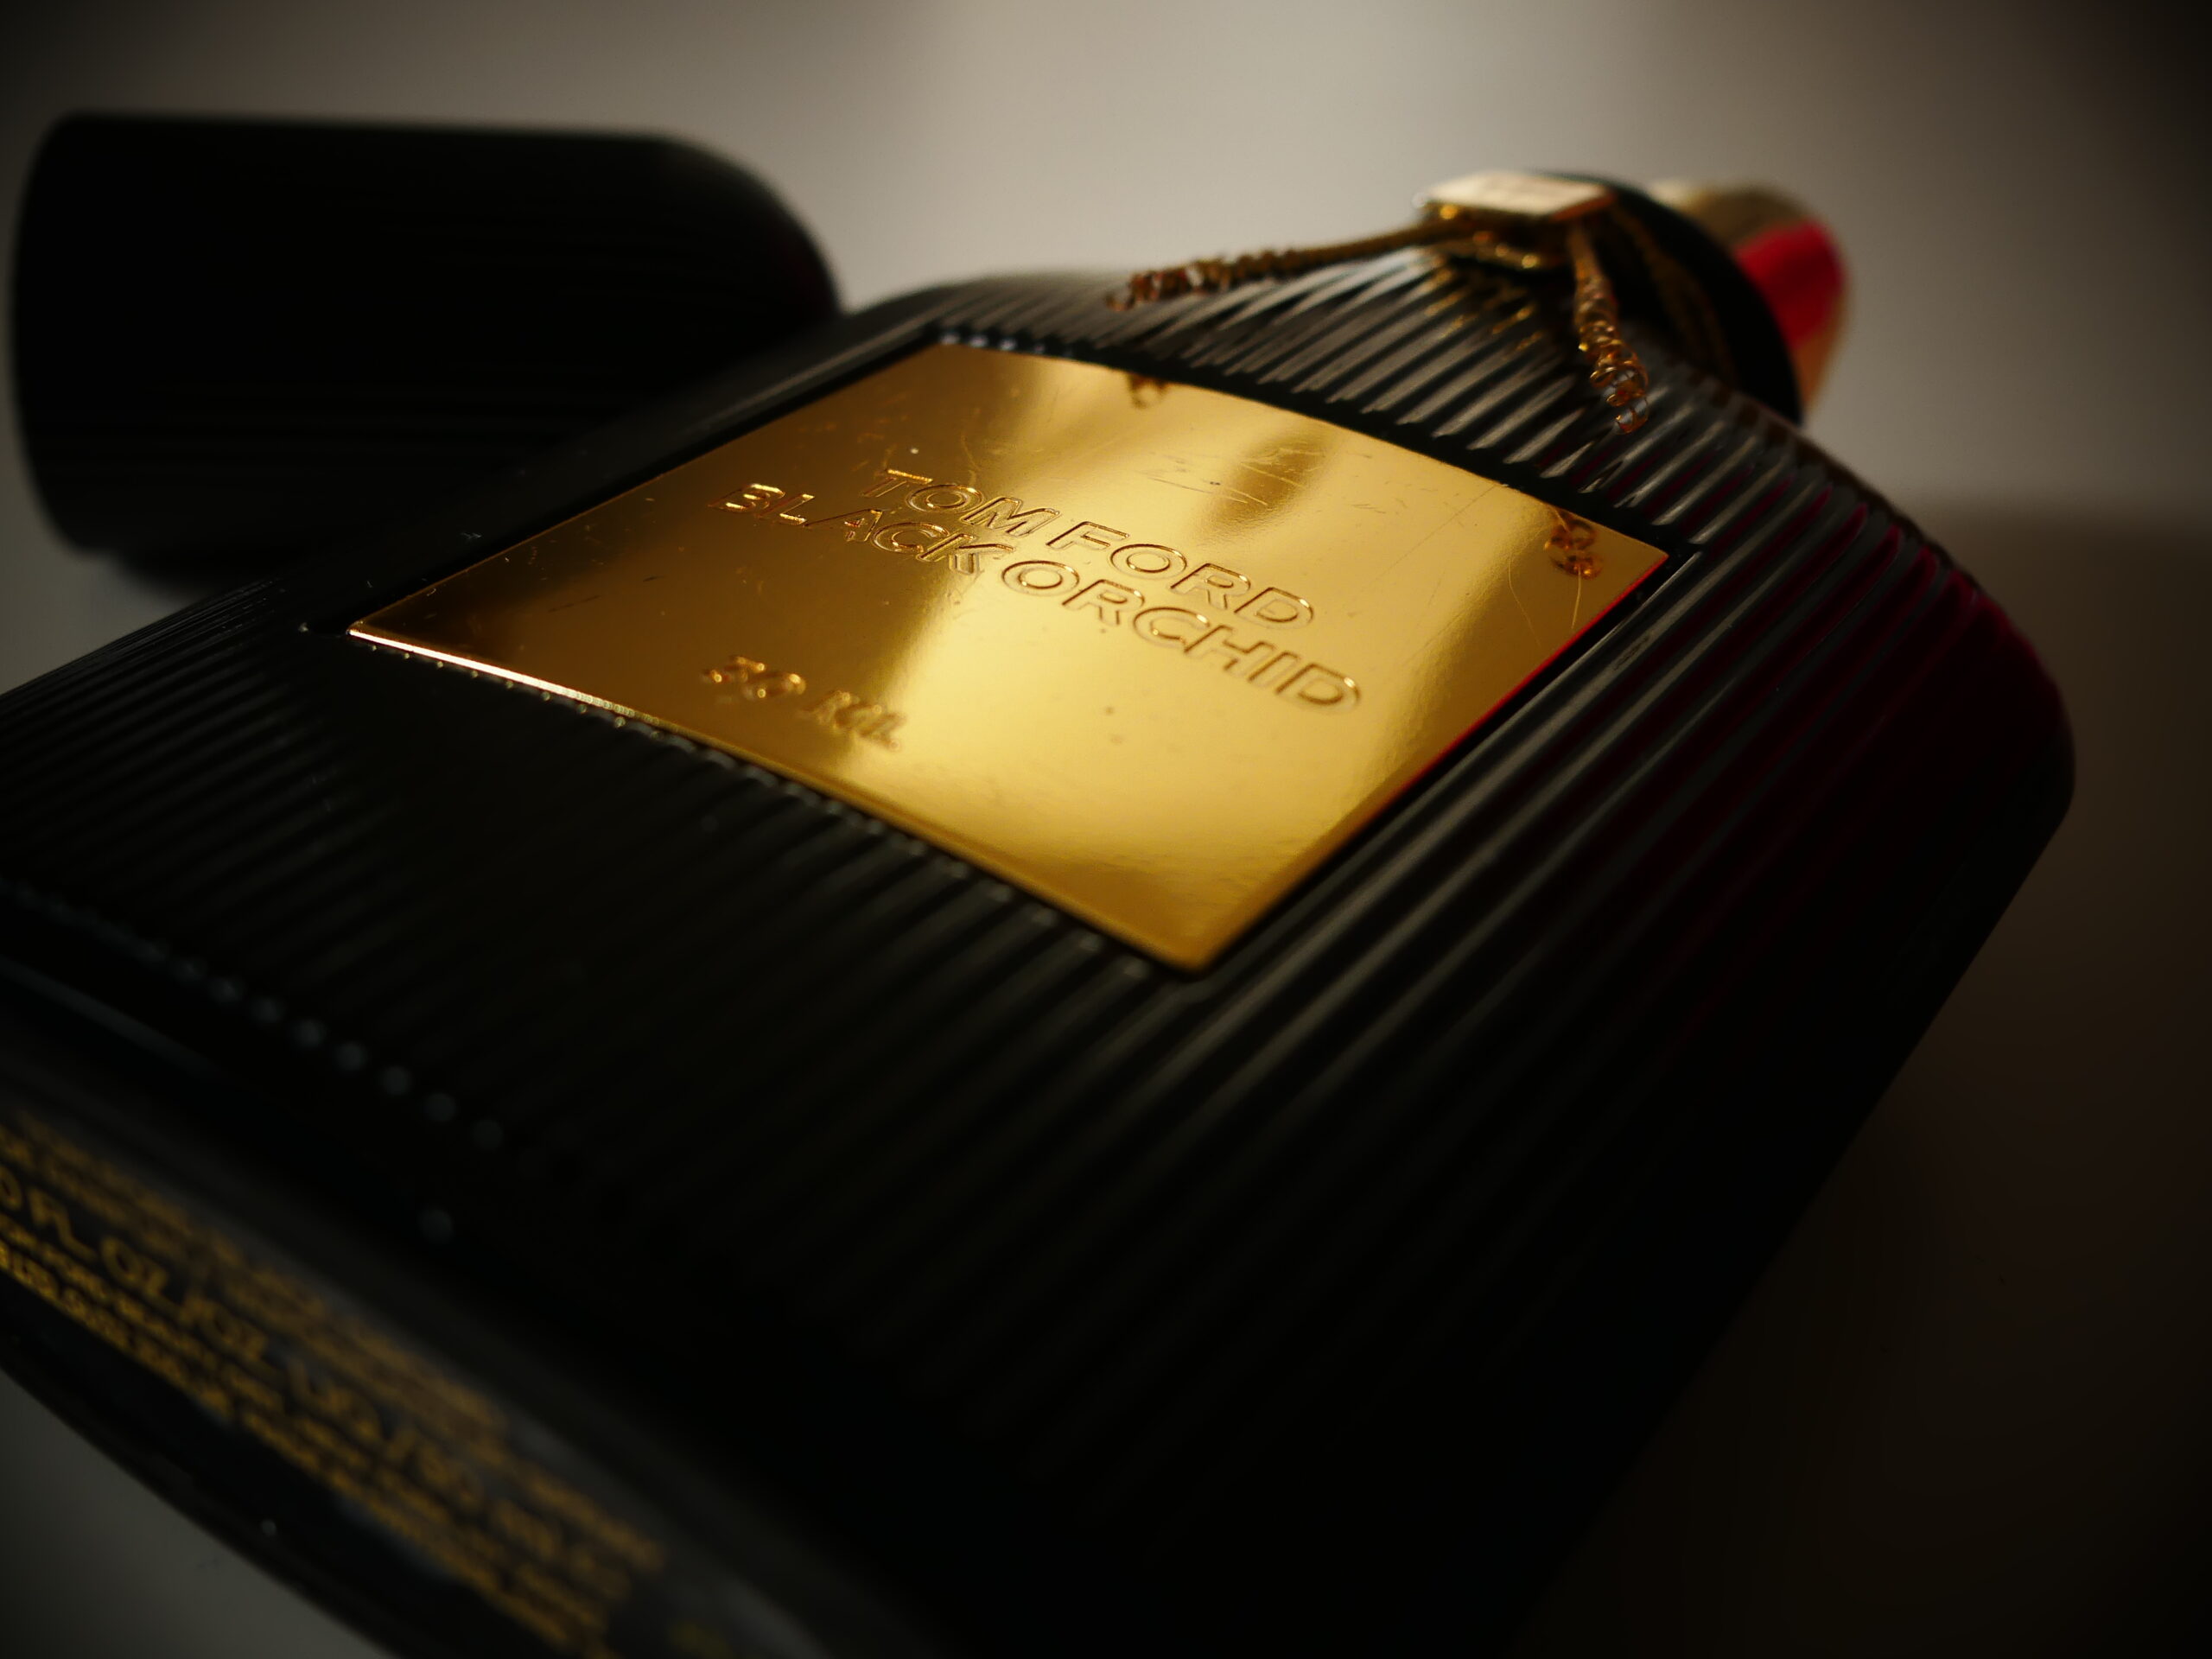 Black Orchid by Tom Ford - a perfume like no other -